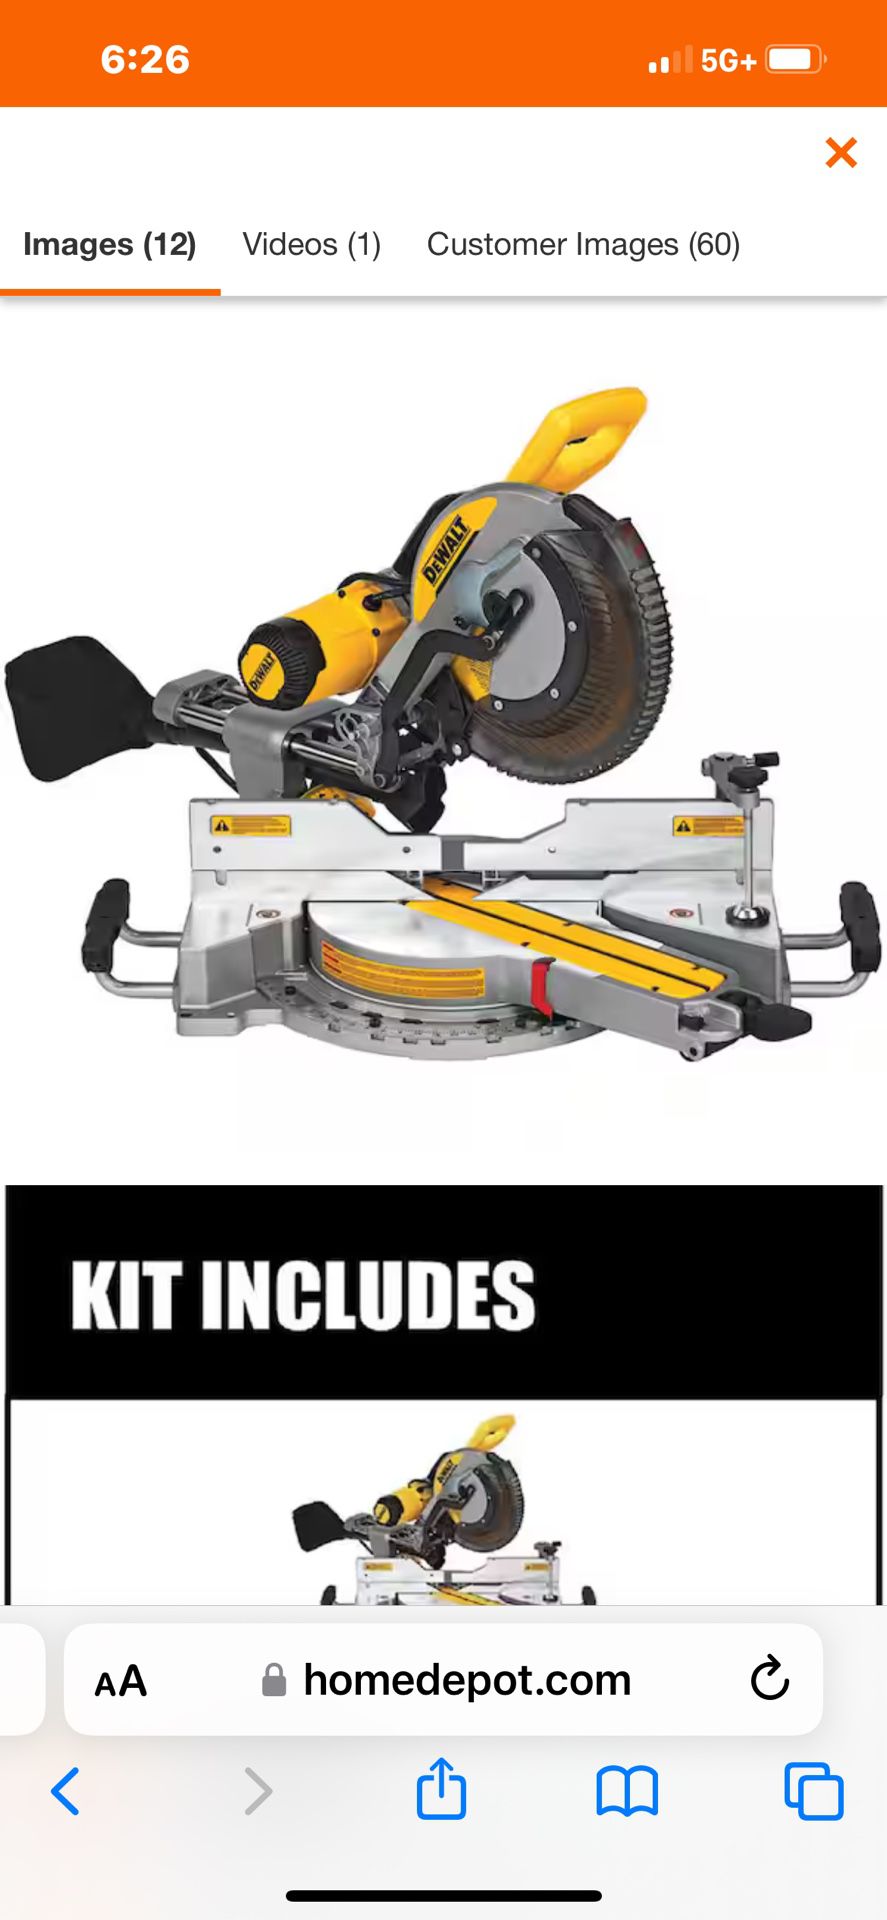 Dewalt 15 Amp Corded 12 in. Double Bevel Sliding Compound Miter Saw, Blade Wrench and Material Clamp